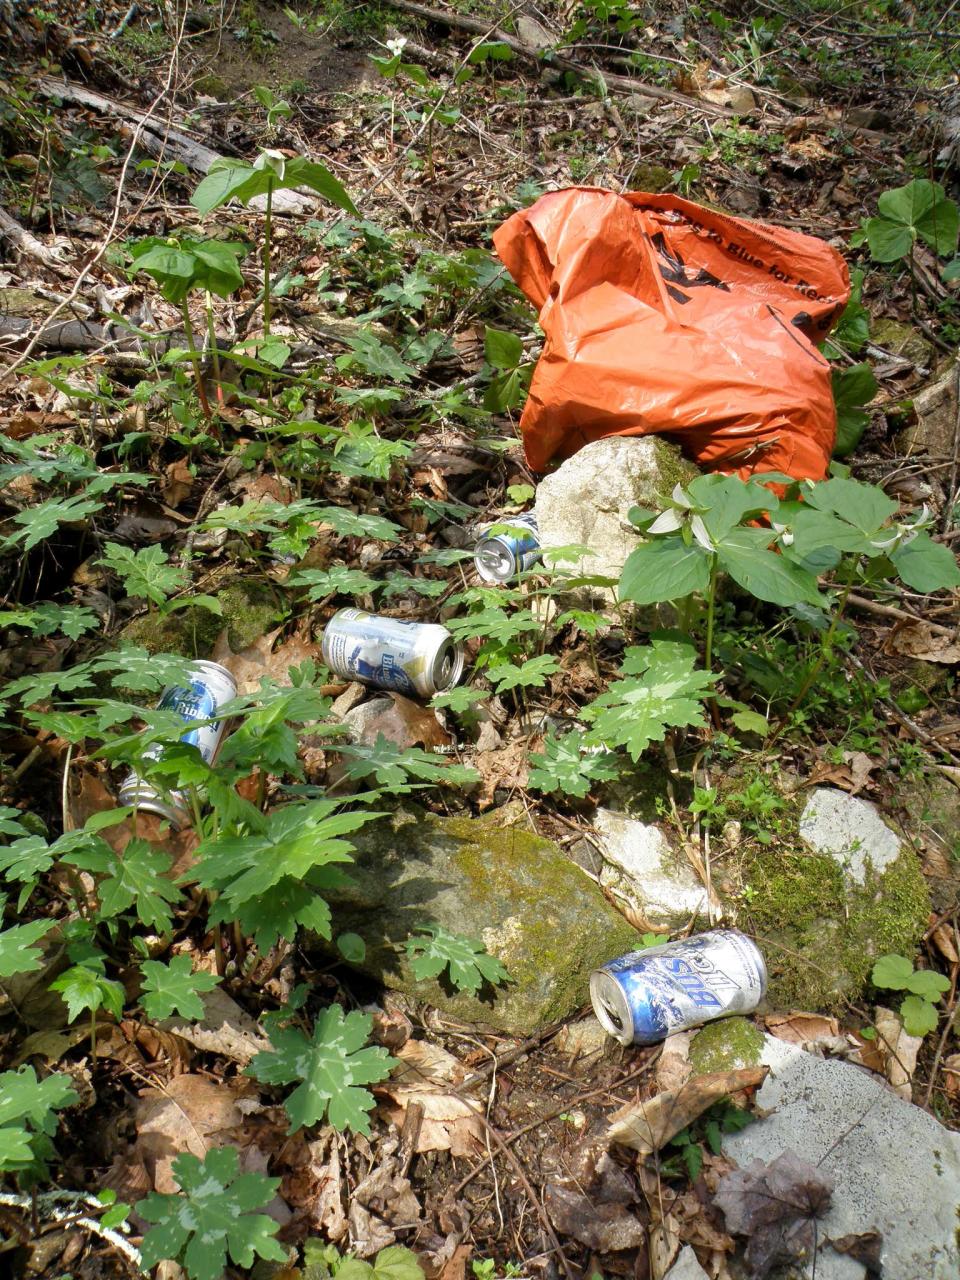 Littering is a pervasive problem throughout the mountains. It is also illegal statewide.